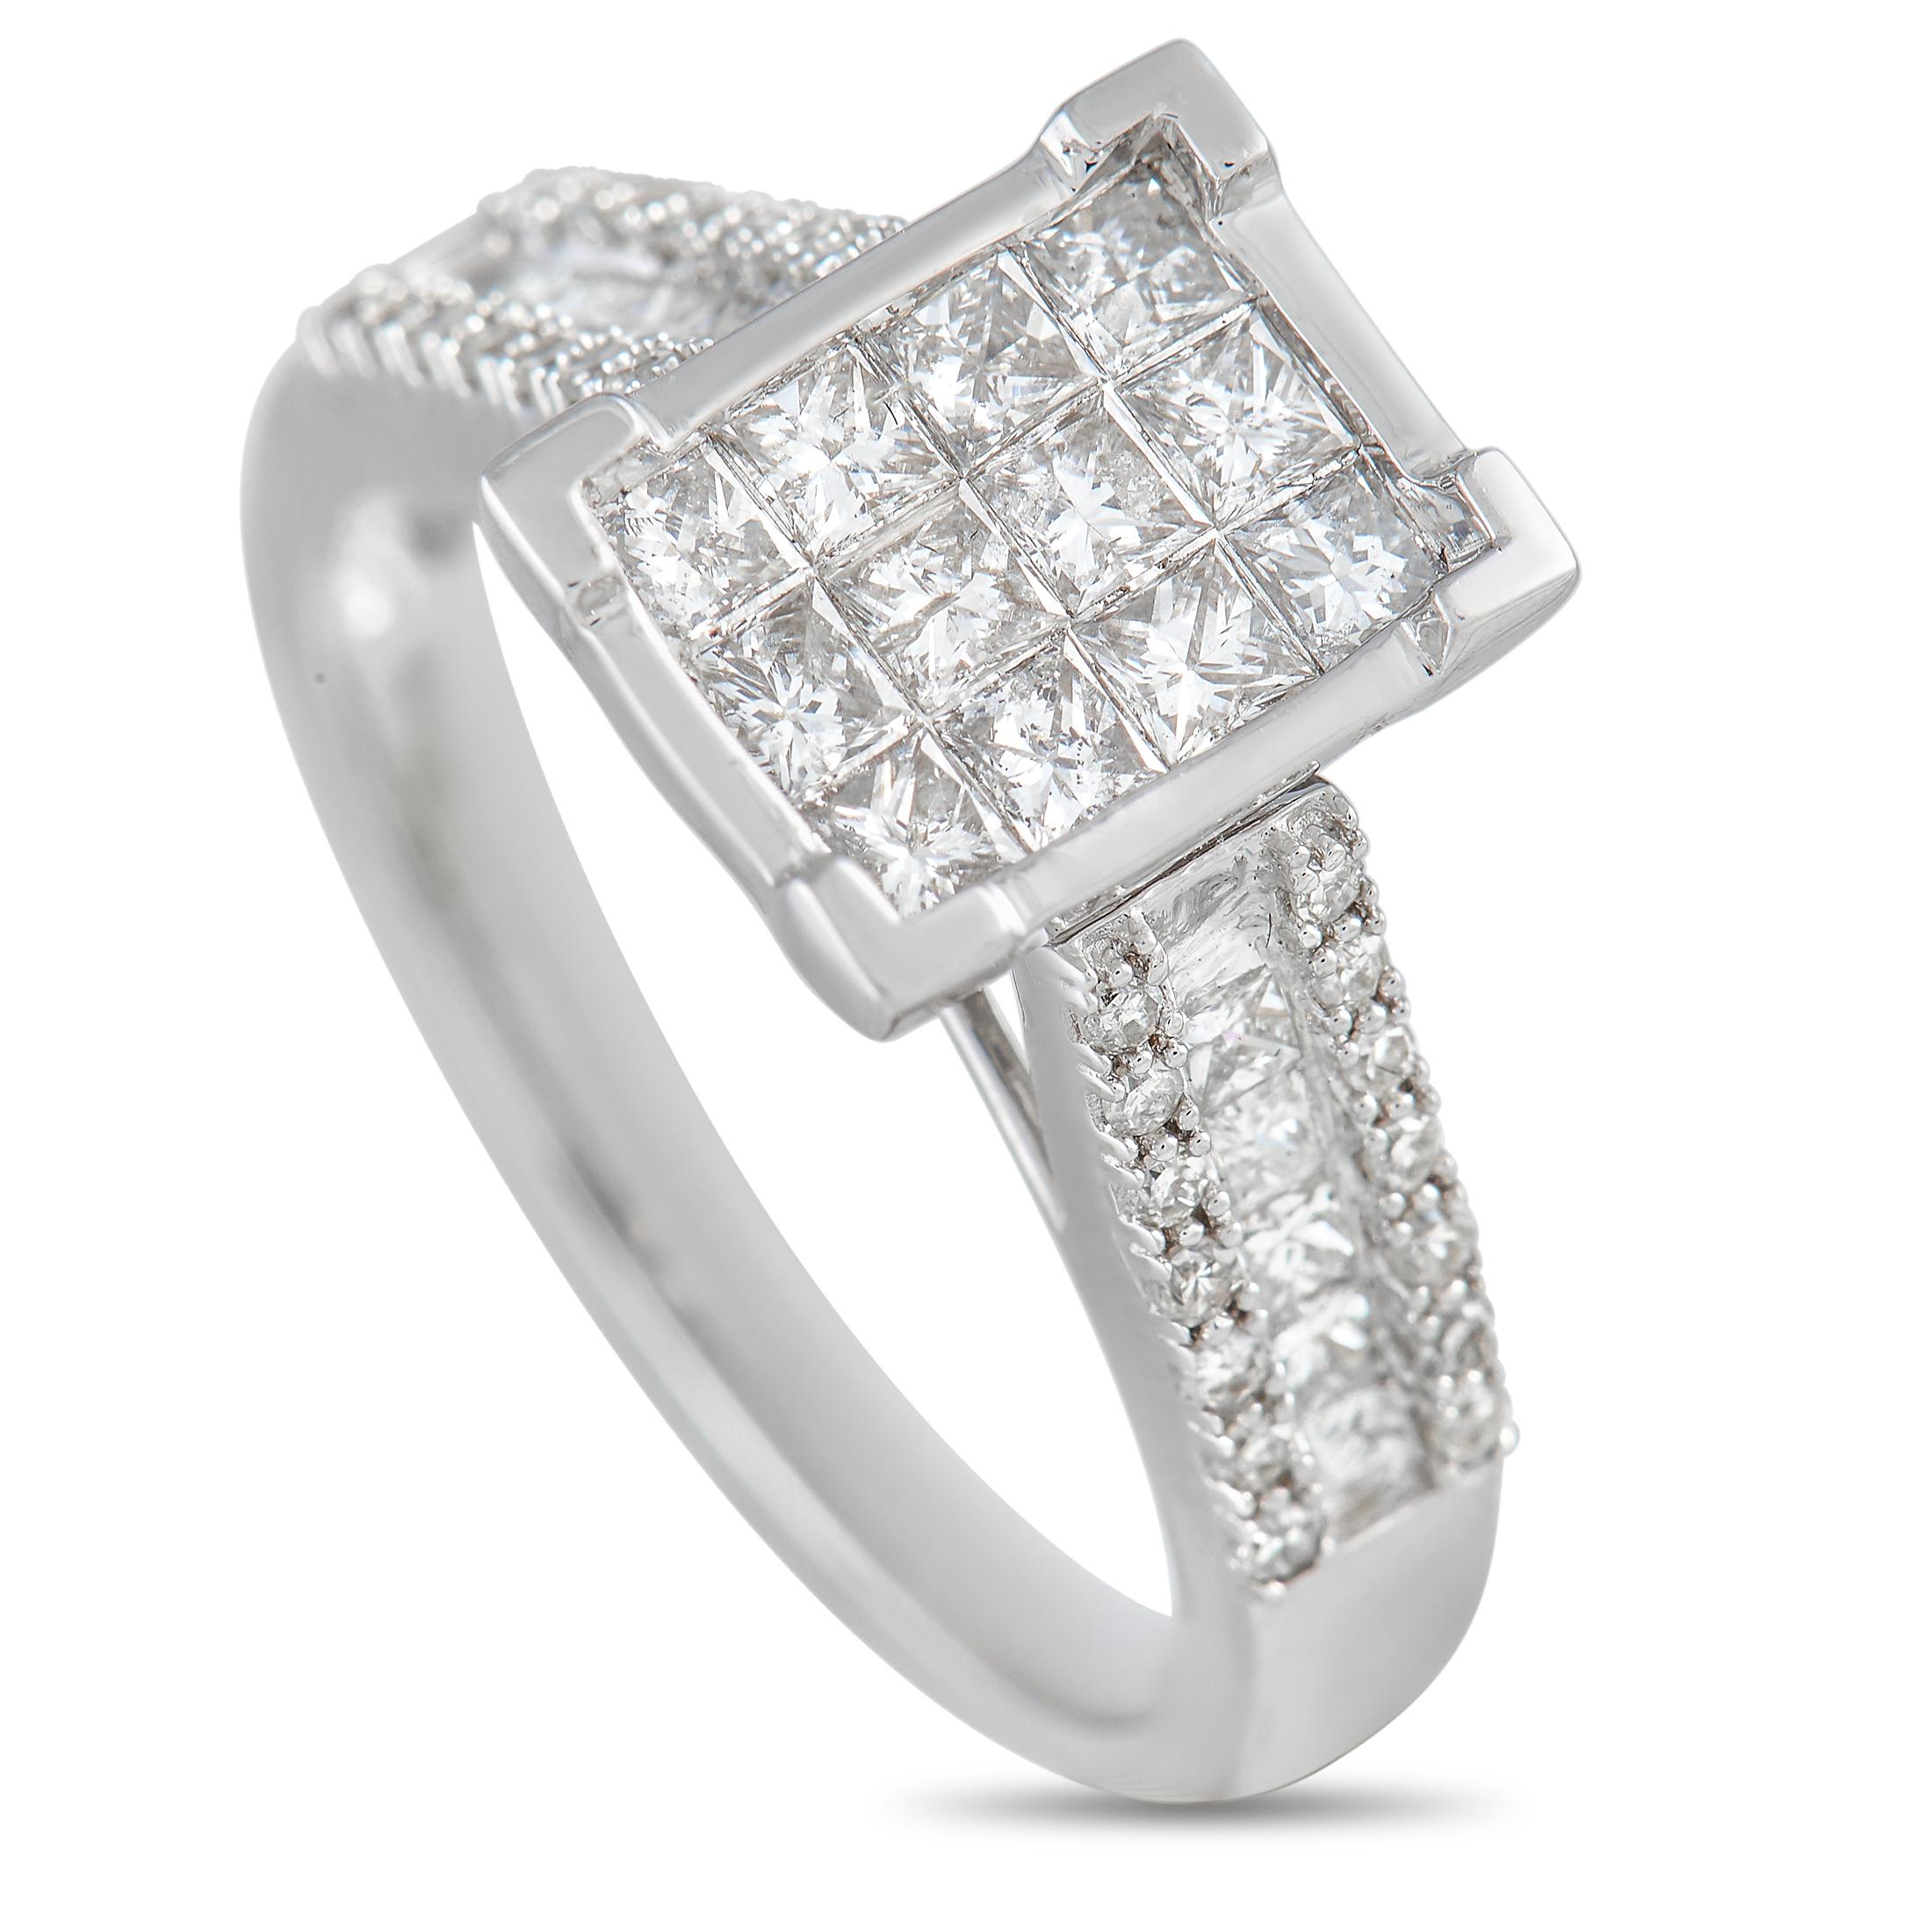 This 14K White Gold ring exudes a timeless sense of sophistication. At the center of the diamond-accented band, you’ll find a square setting that displays twelve additional square-cut diamonds. Together, the sparkling stones possess a total weight